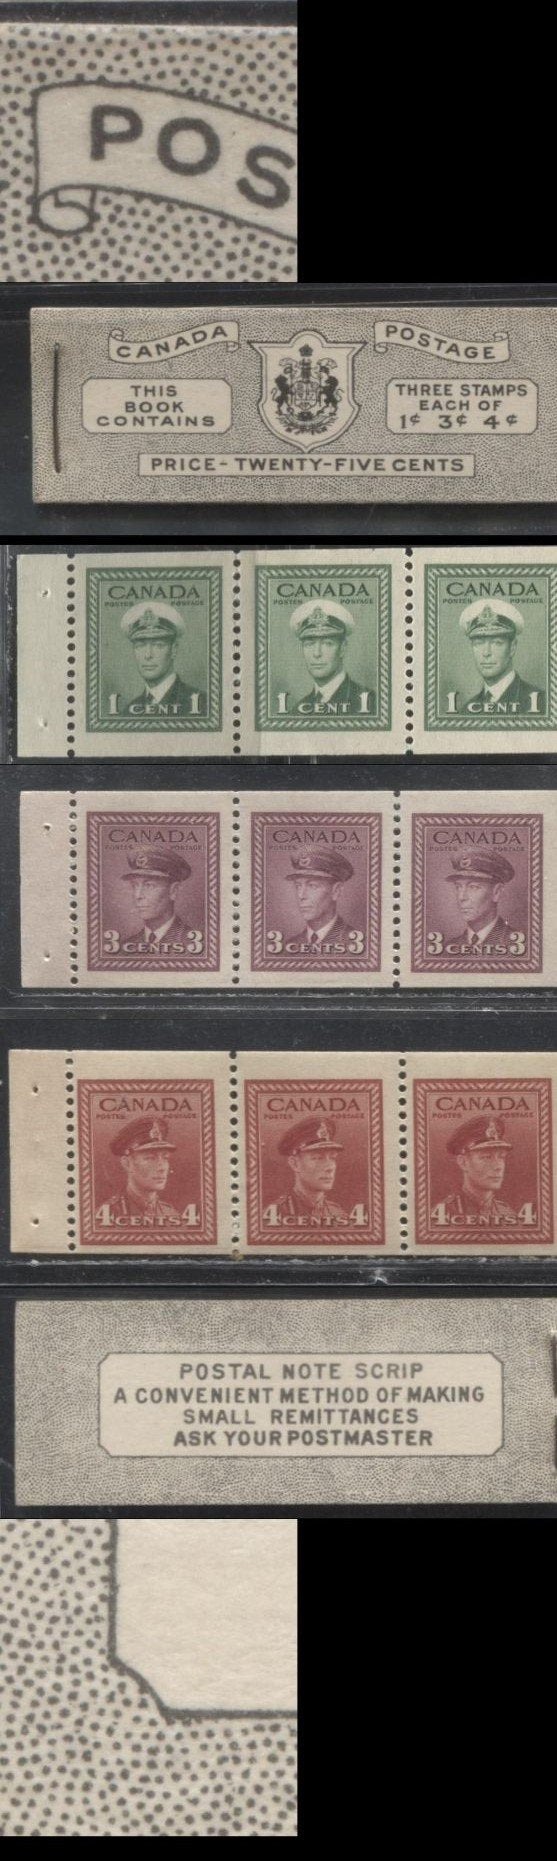 Lot 288 Canada #BK38a 1942-1949 War Issue Complete 25c, English Booklet Containing 1 Pane Each of 3 of 1c Green, 3c Rosy Plum and 4c Carmine Red, Harris Front Cover Type IVb , Back Cover Haii, 7c & 6c Rate Page